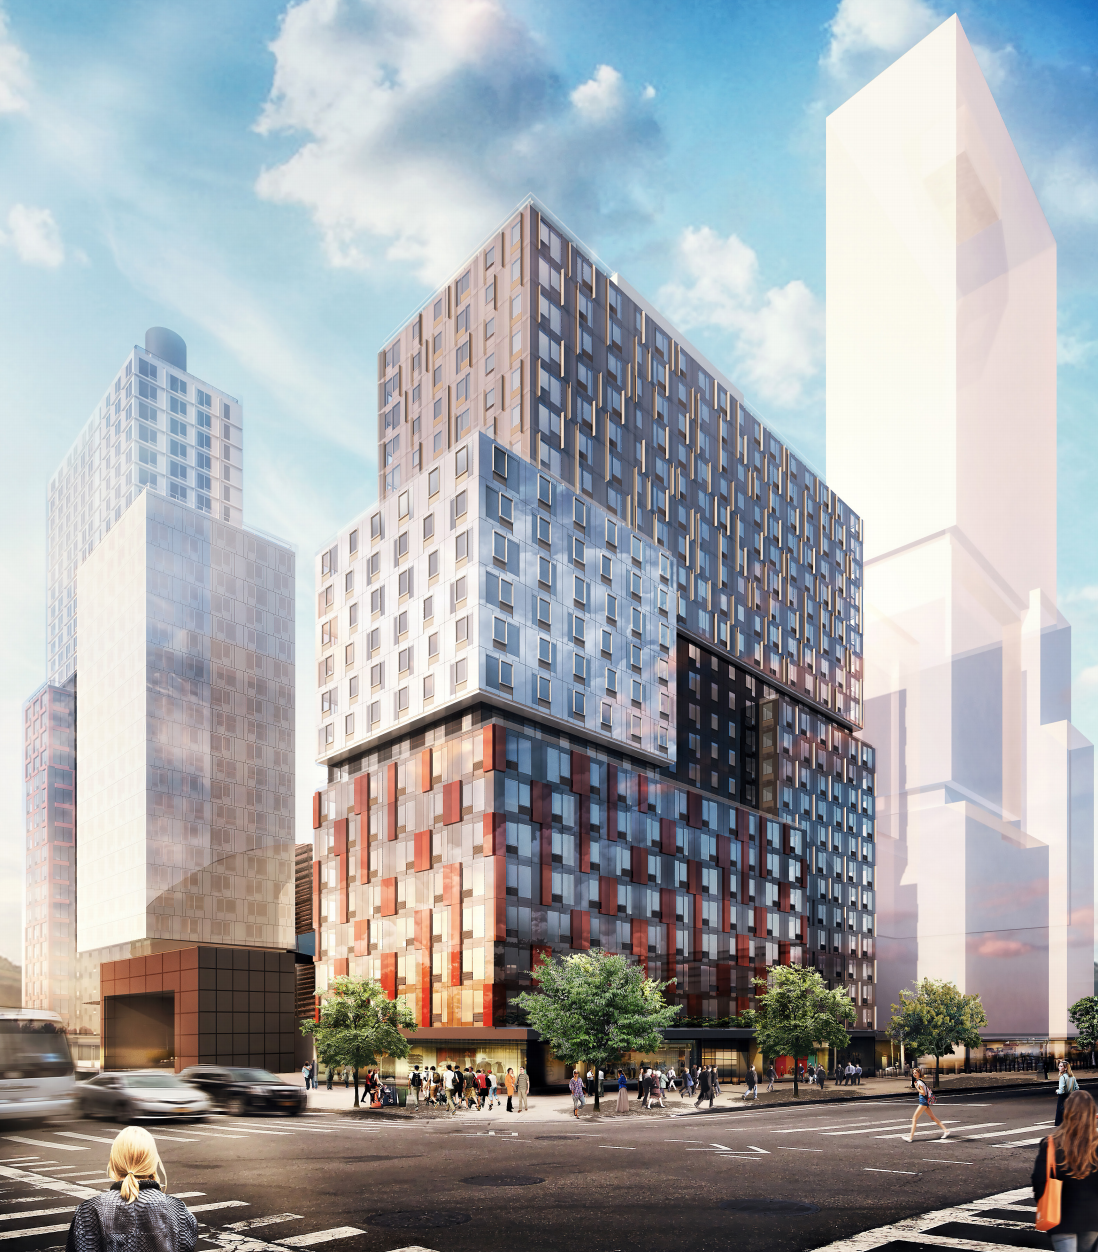 38 Sixth Avenue, rendering by SHoP Architects